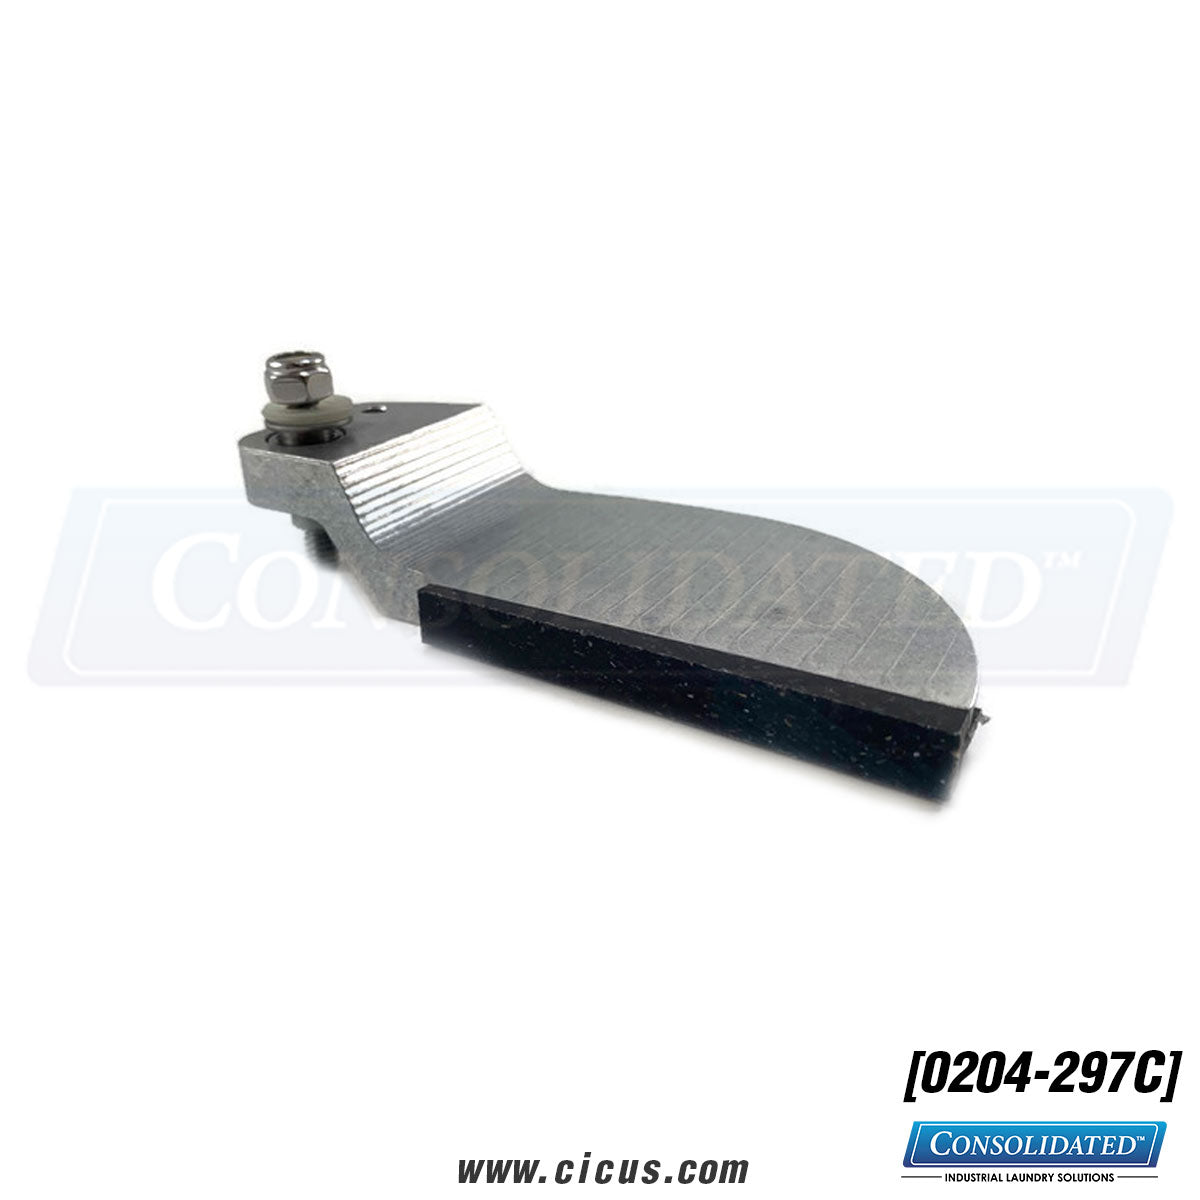 CICUS Right Jaw Transfer Clamp For Chicago Dryer King Edge [0204-297C]